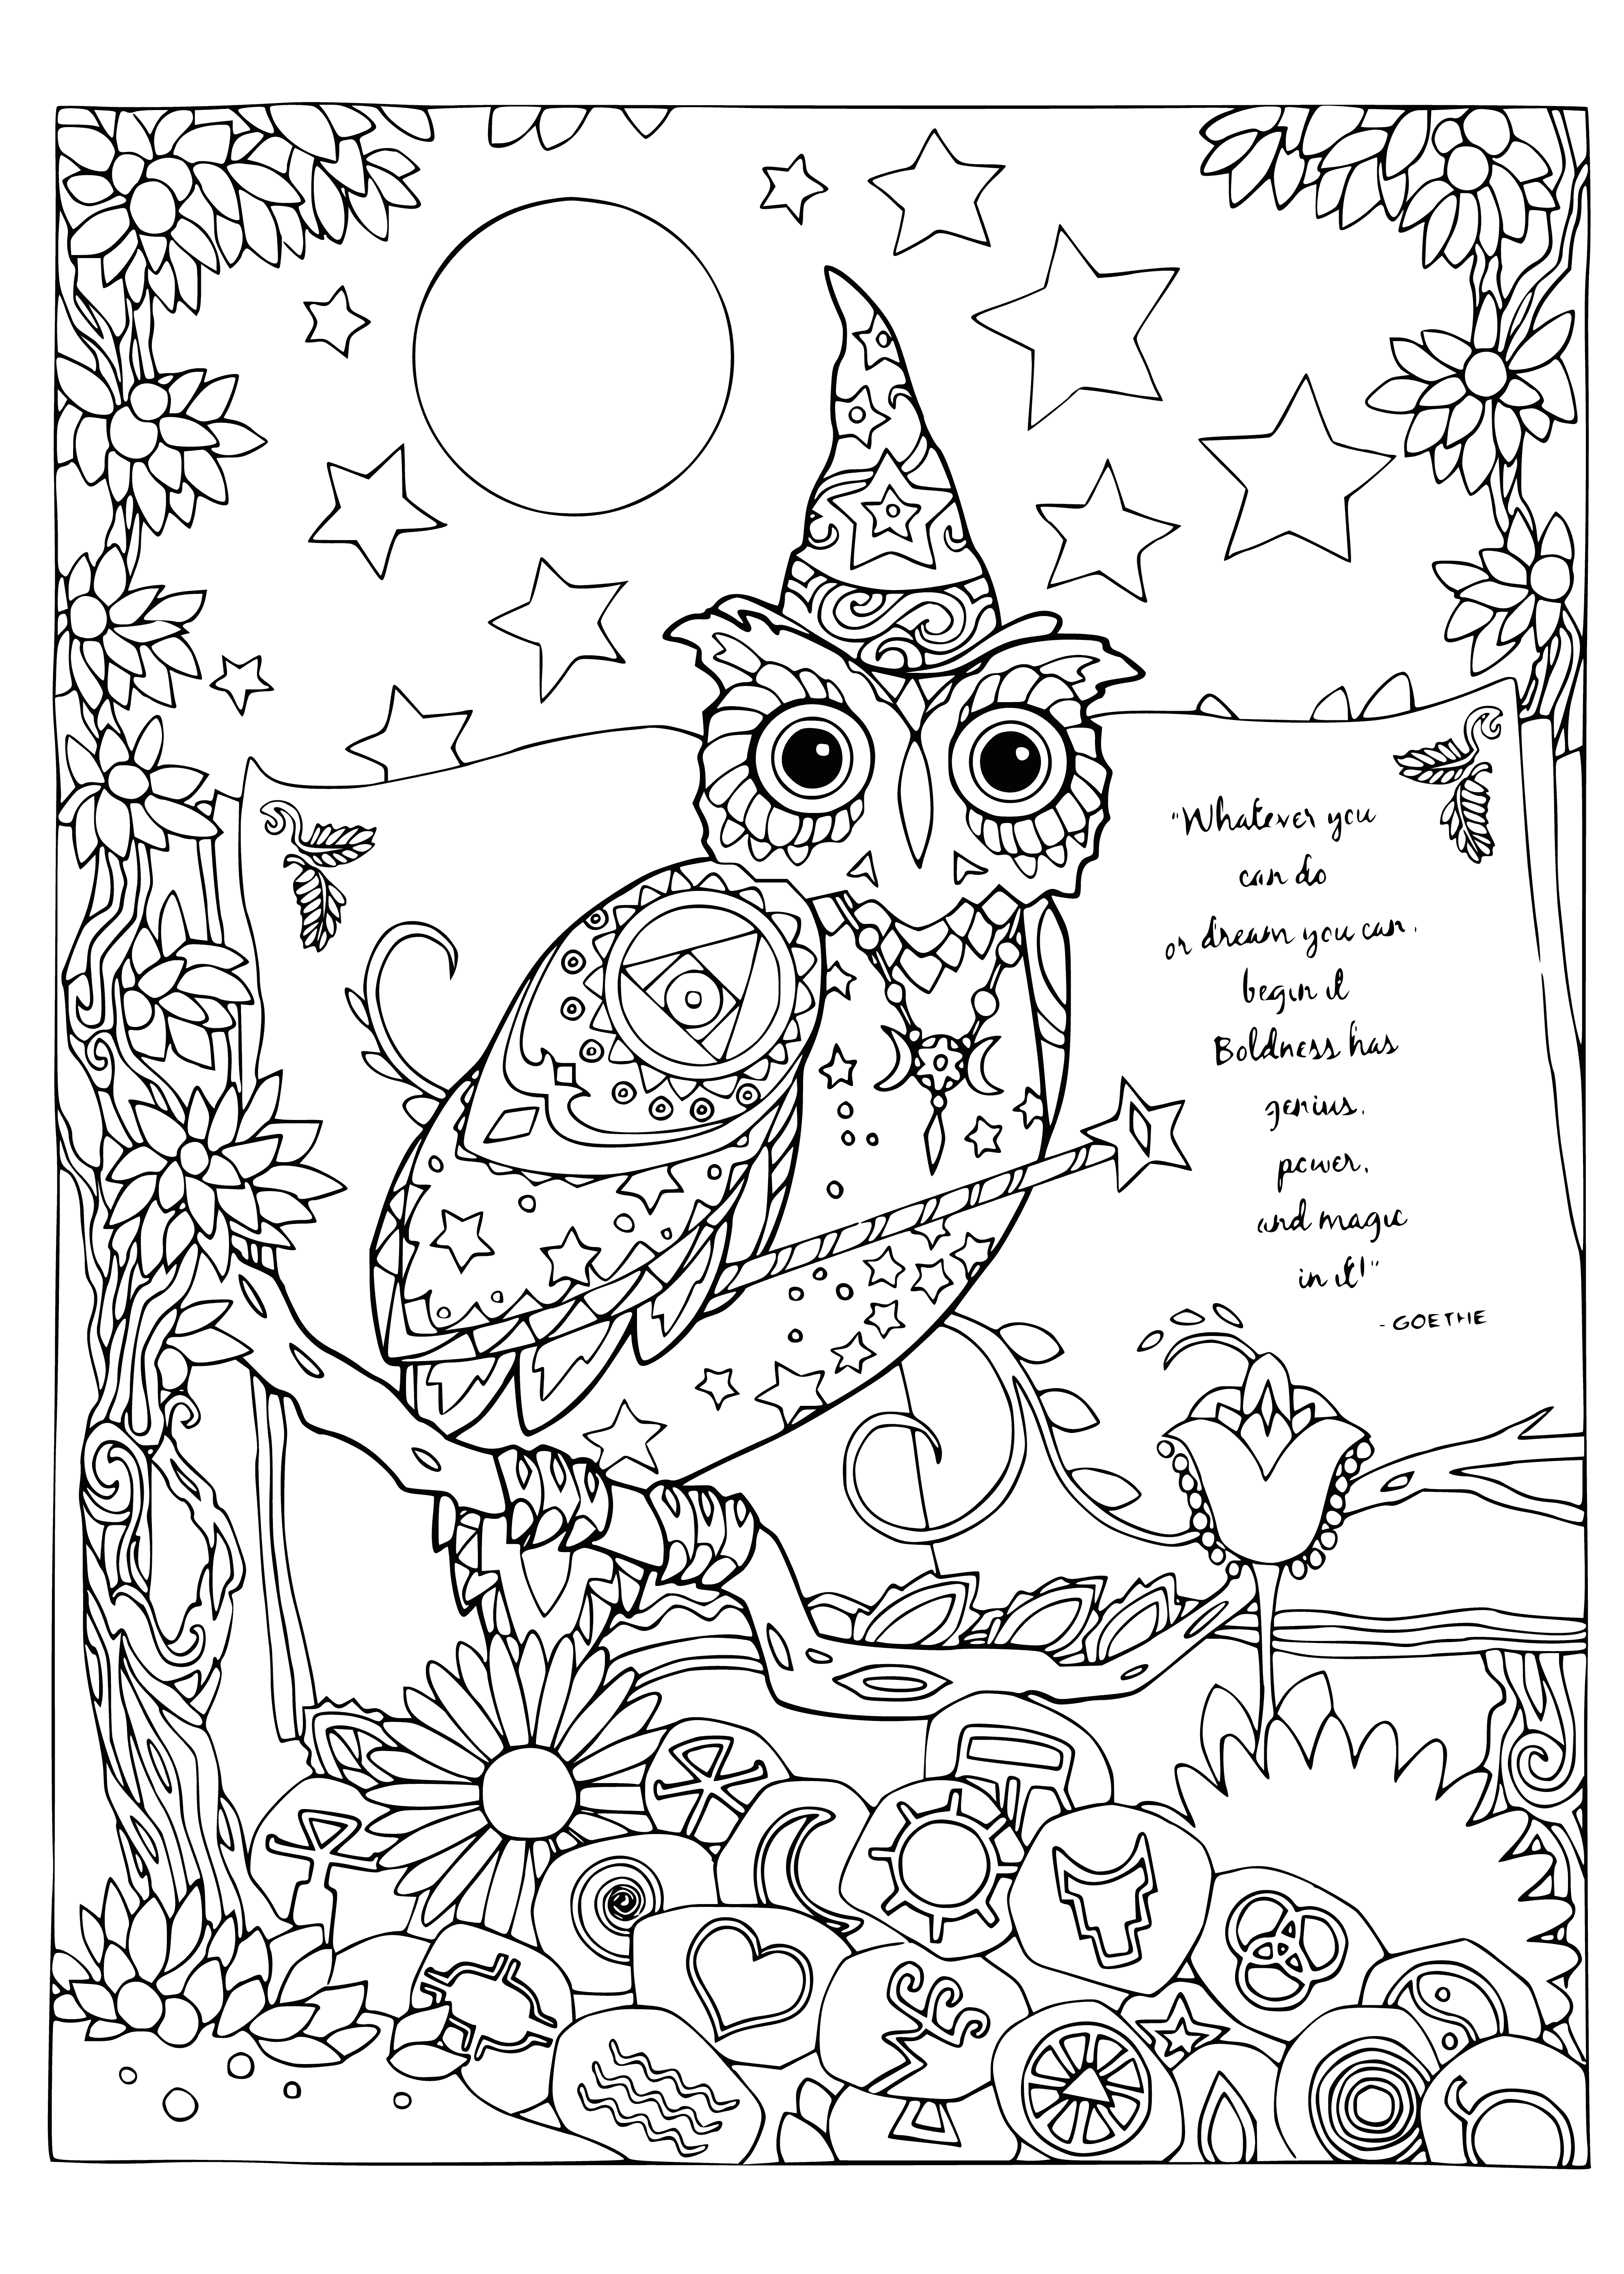 Wizard Owl coloring page